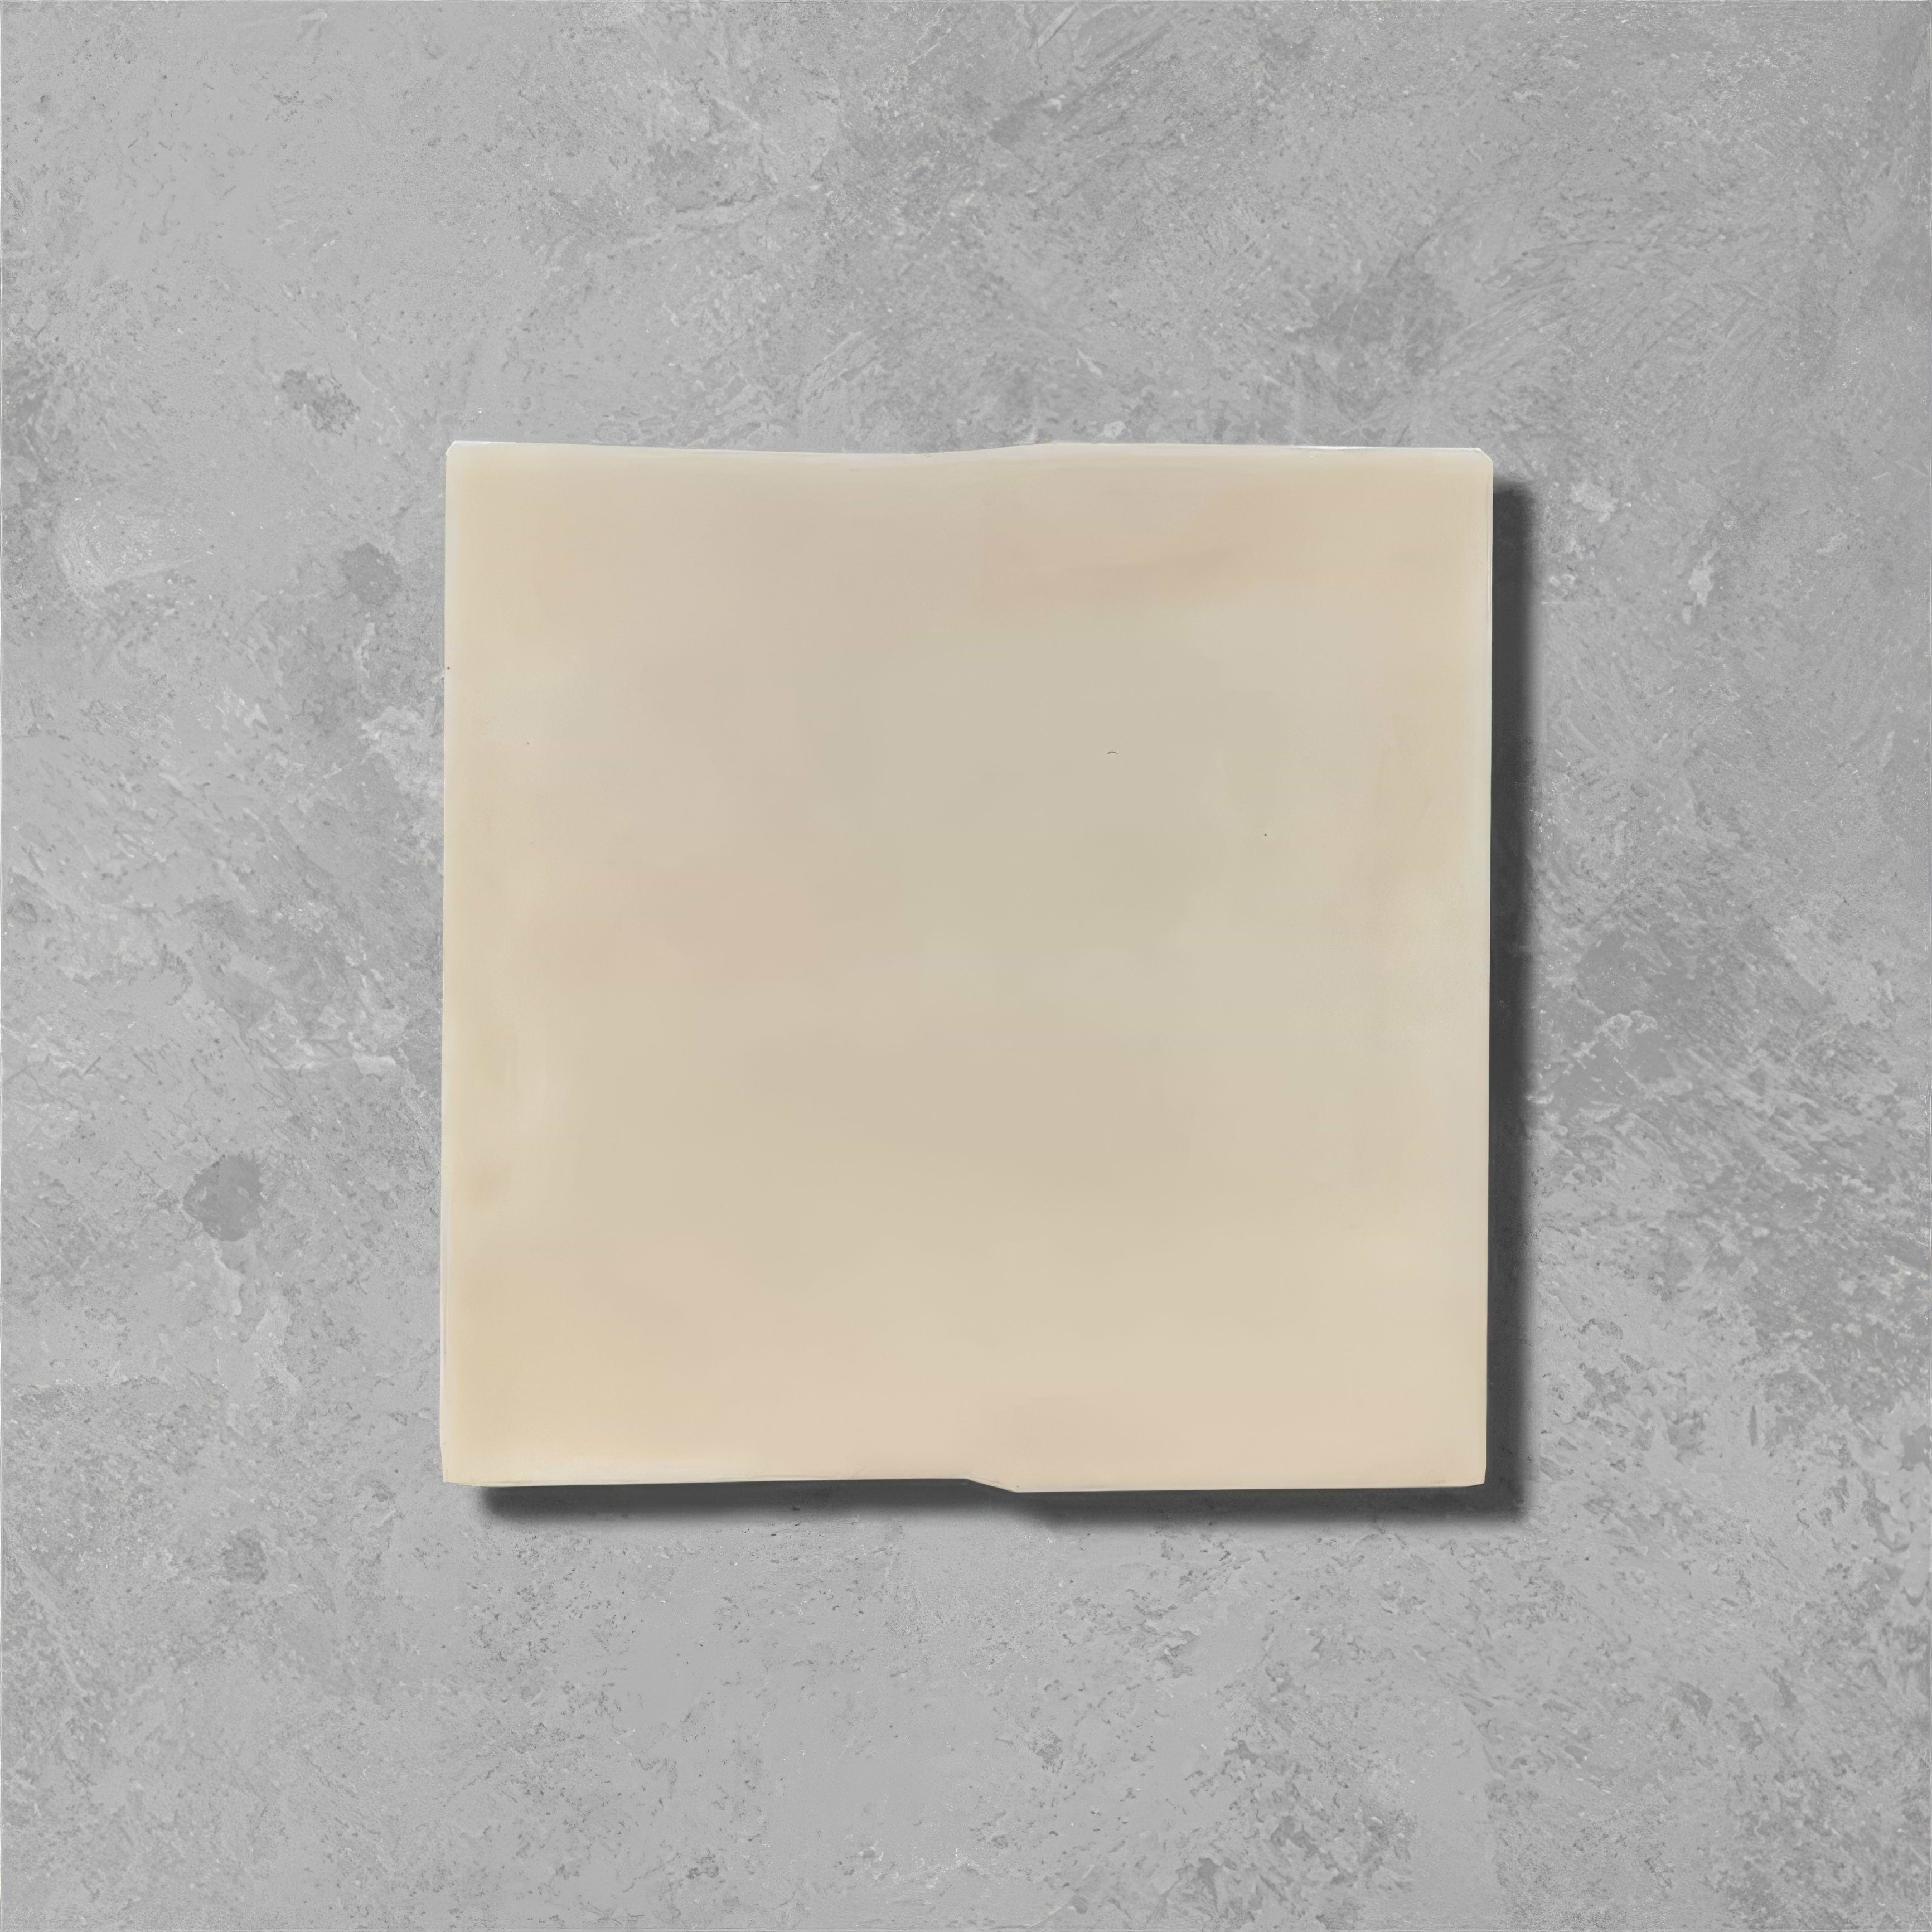 Pearl Pale Waterfall Glazed Square Tile